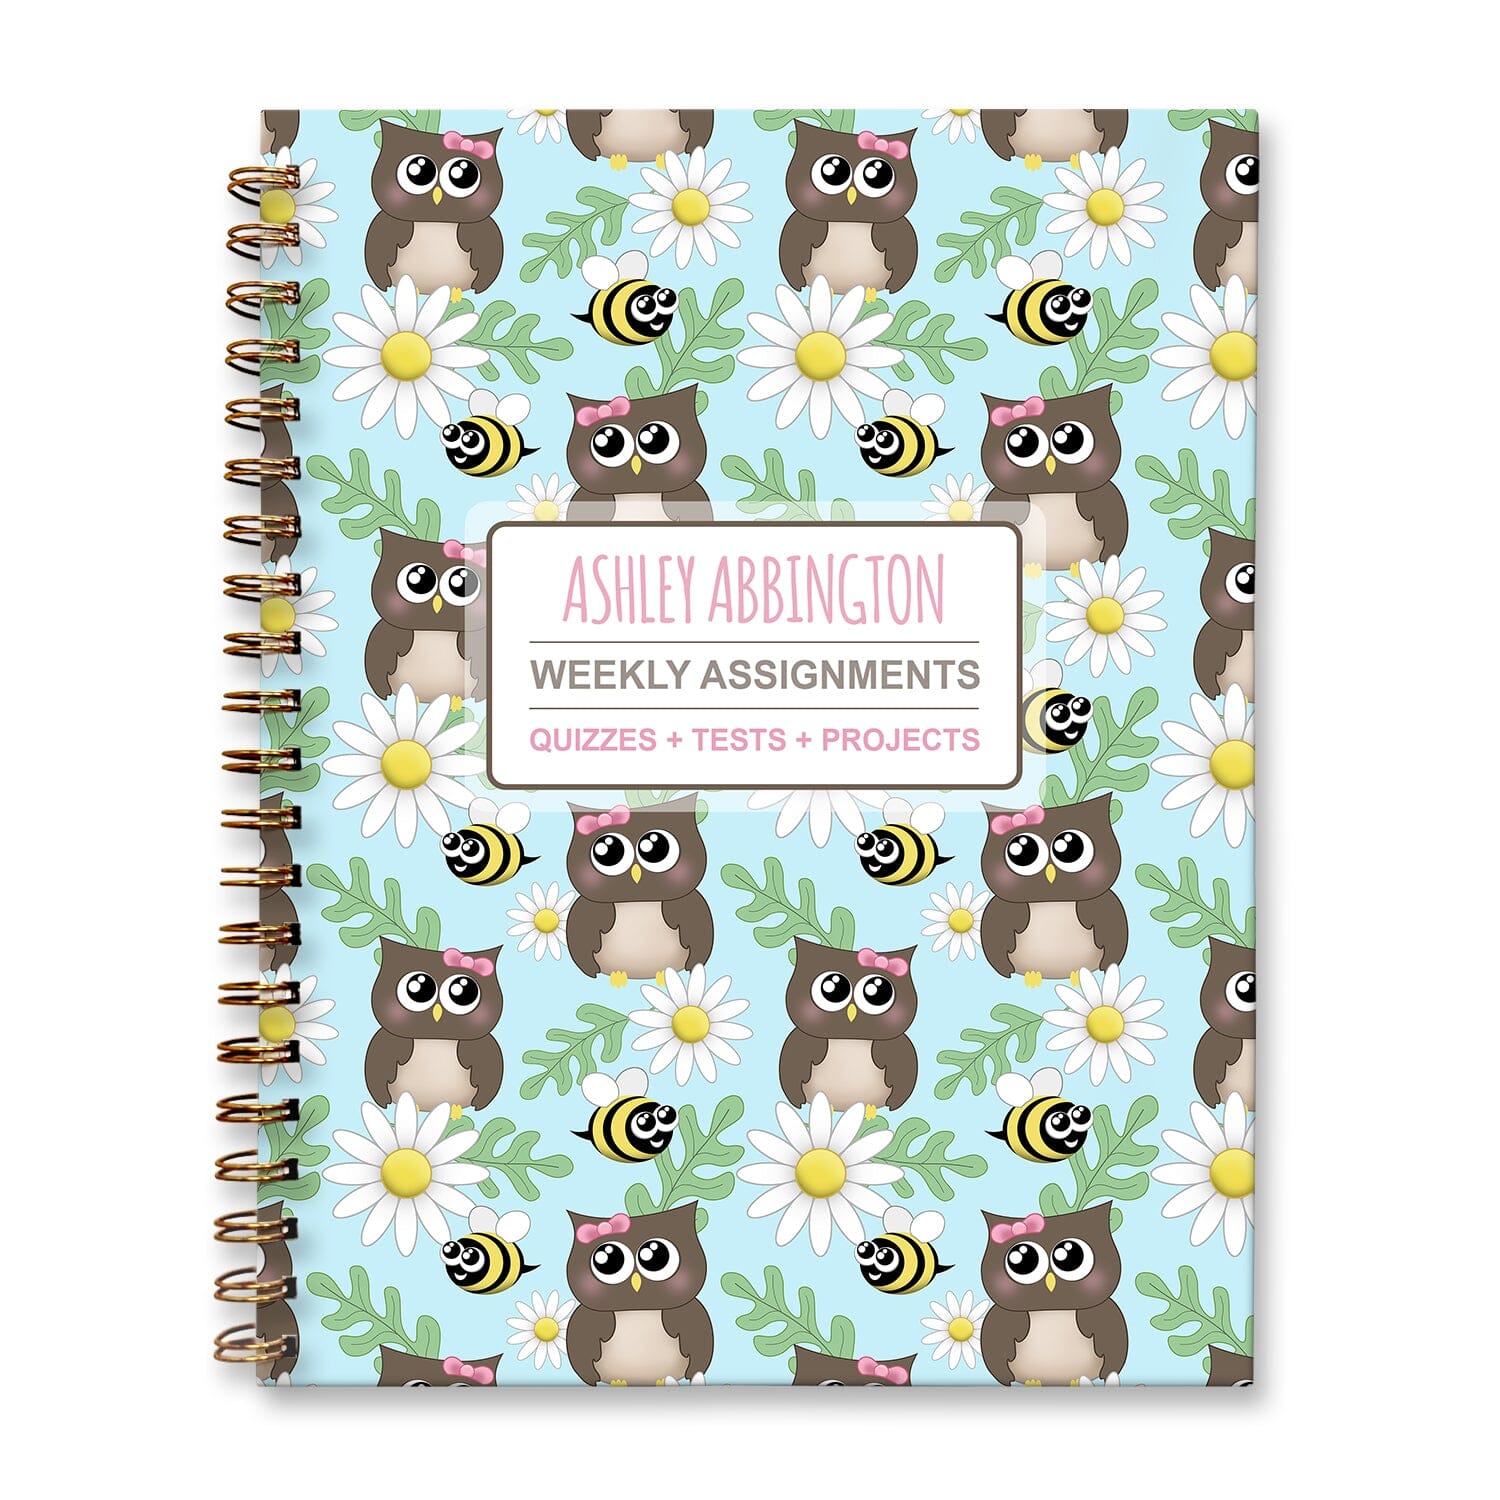 Personalized Owl Bee Daisy Weekly Assignments Book for students to track their homework, quizzes and tests, and projects every week for school. 